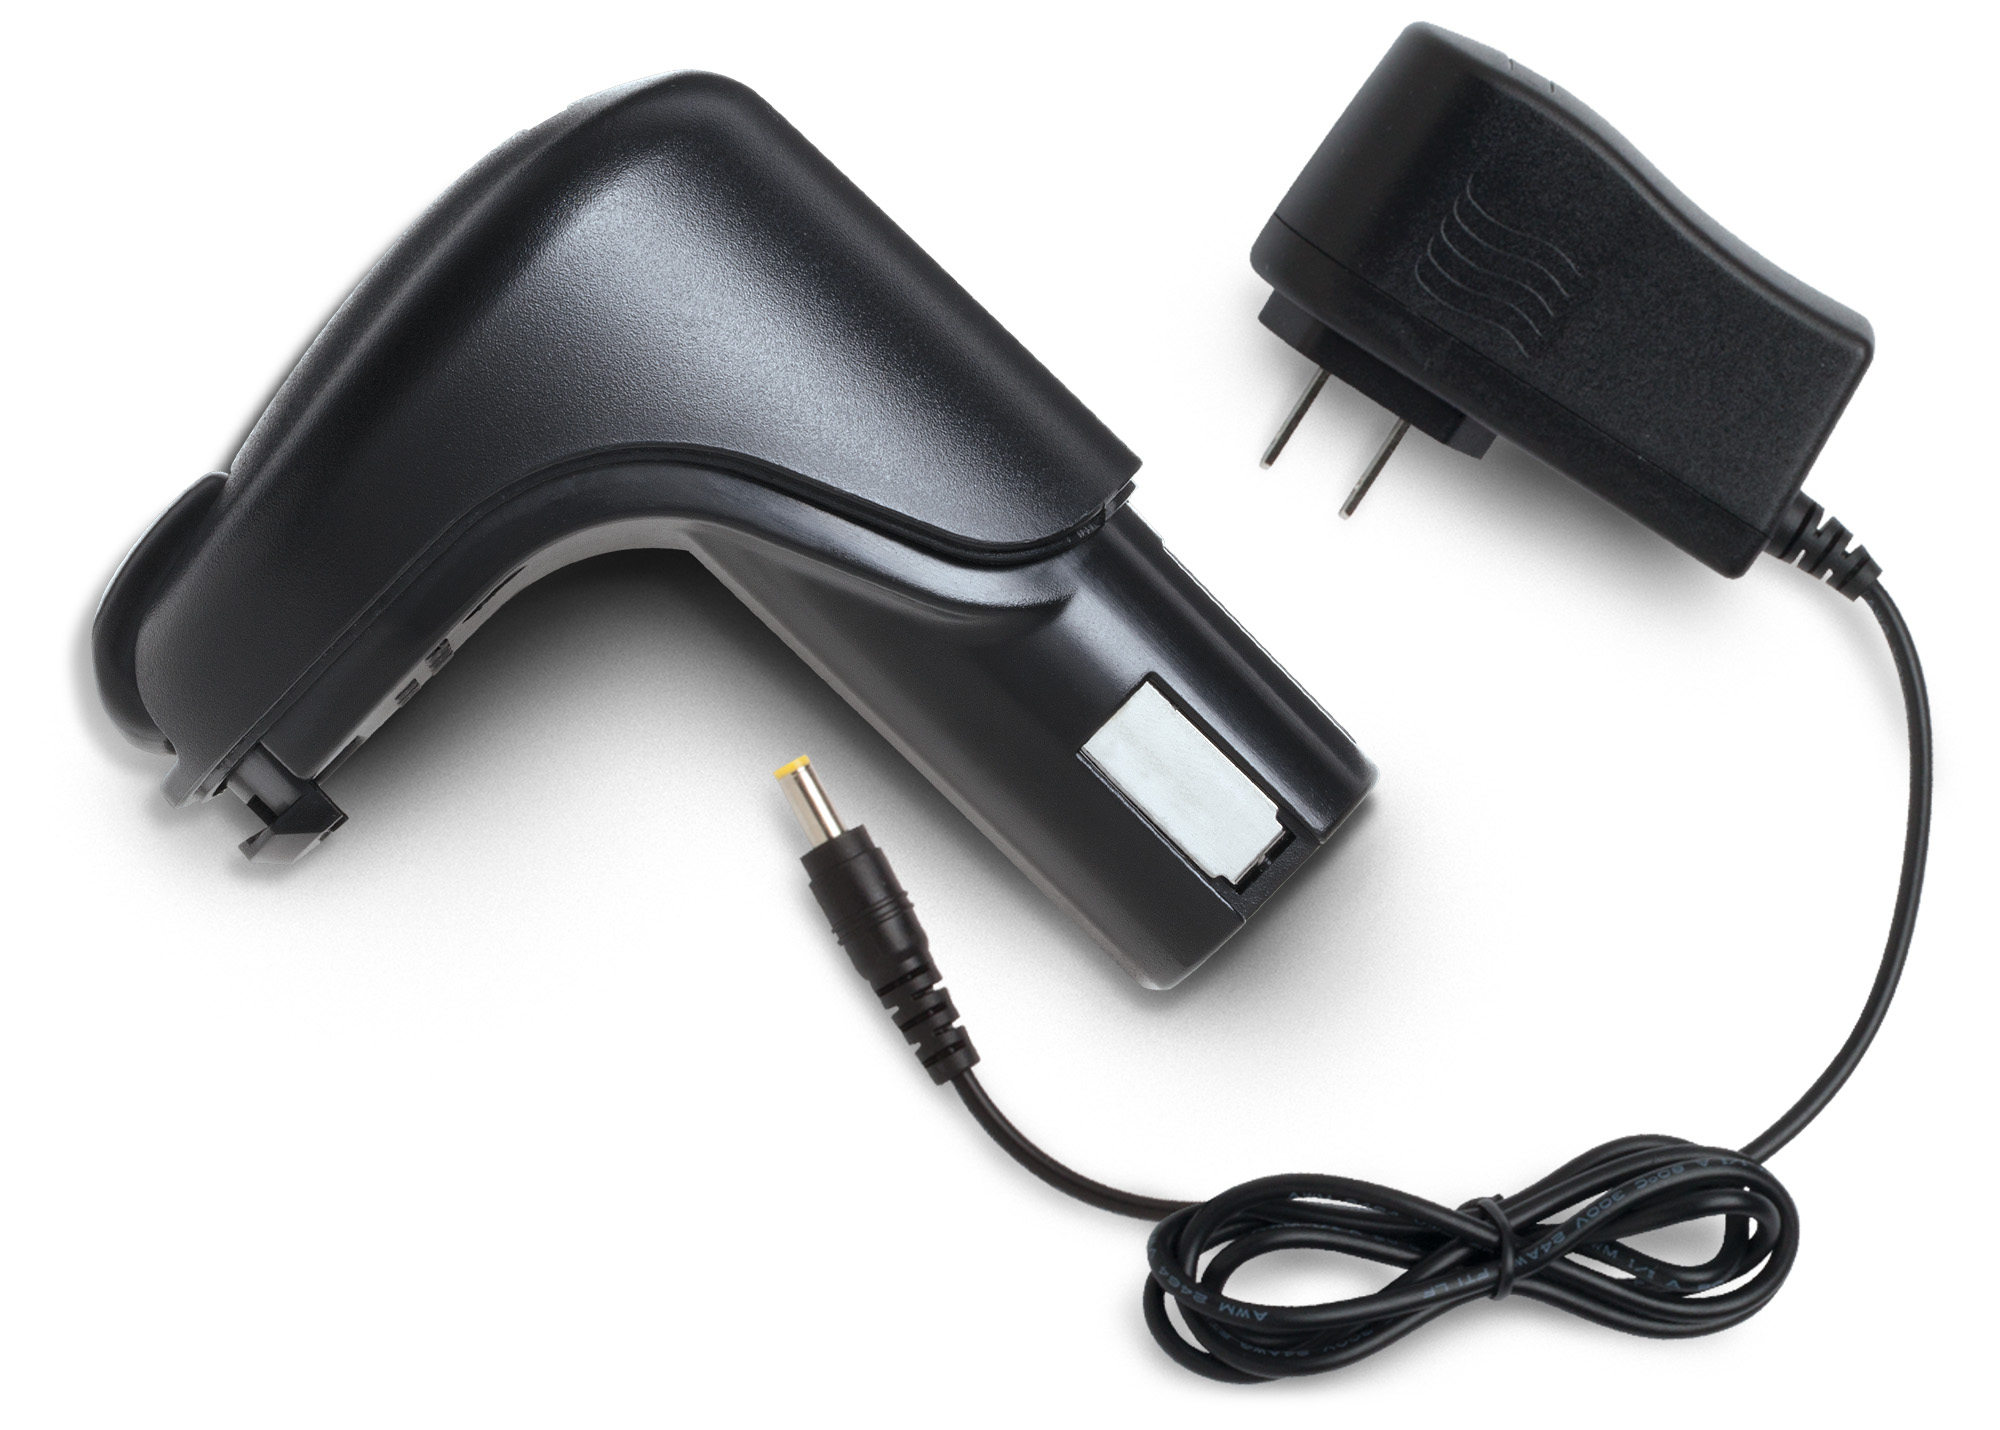 Rapala Lithium Ion Charging Combo RRFNB , $4.00 Off with Free S&H —  CampSaver